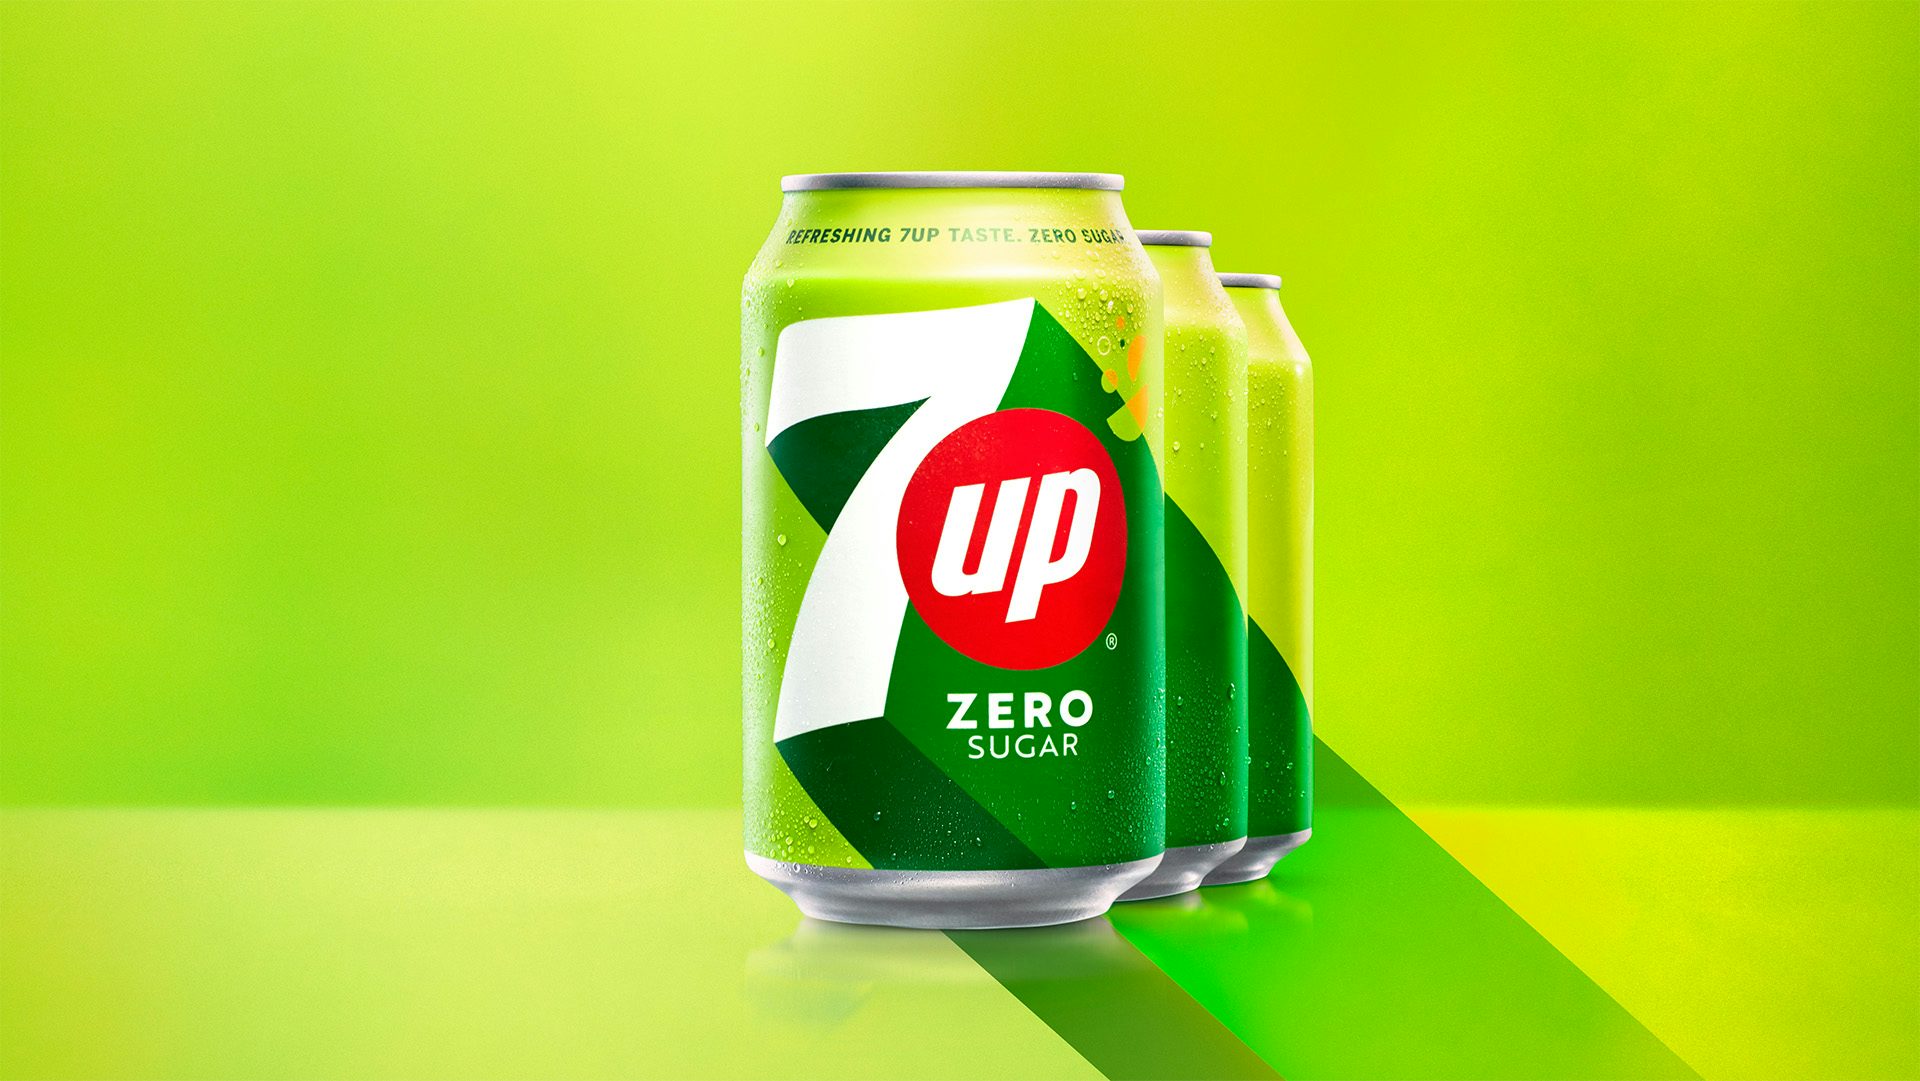 Image shows three cans of 7UP in a row, featuring its new green and lime packaging design